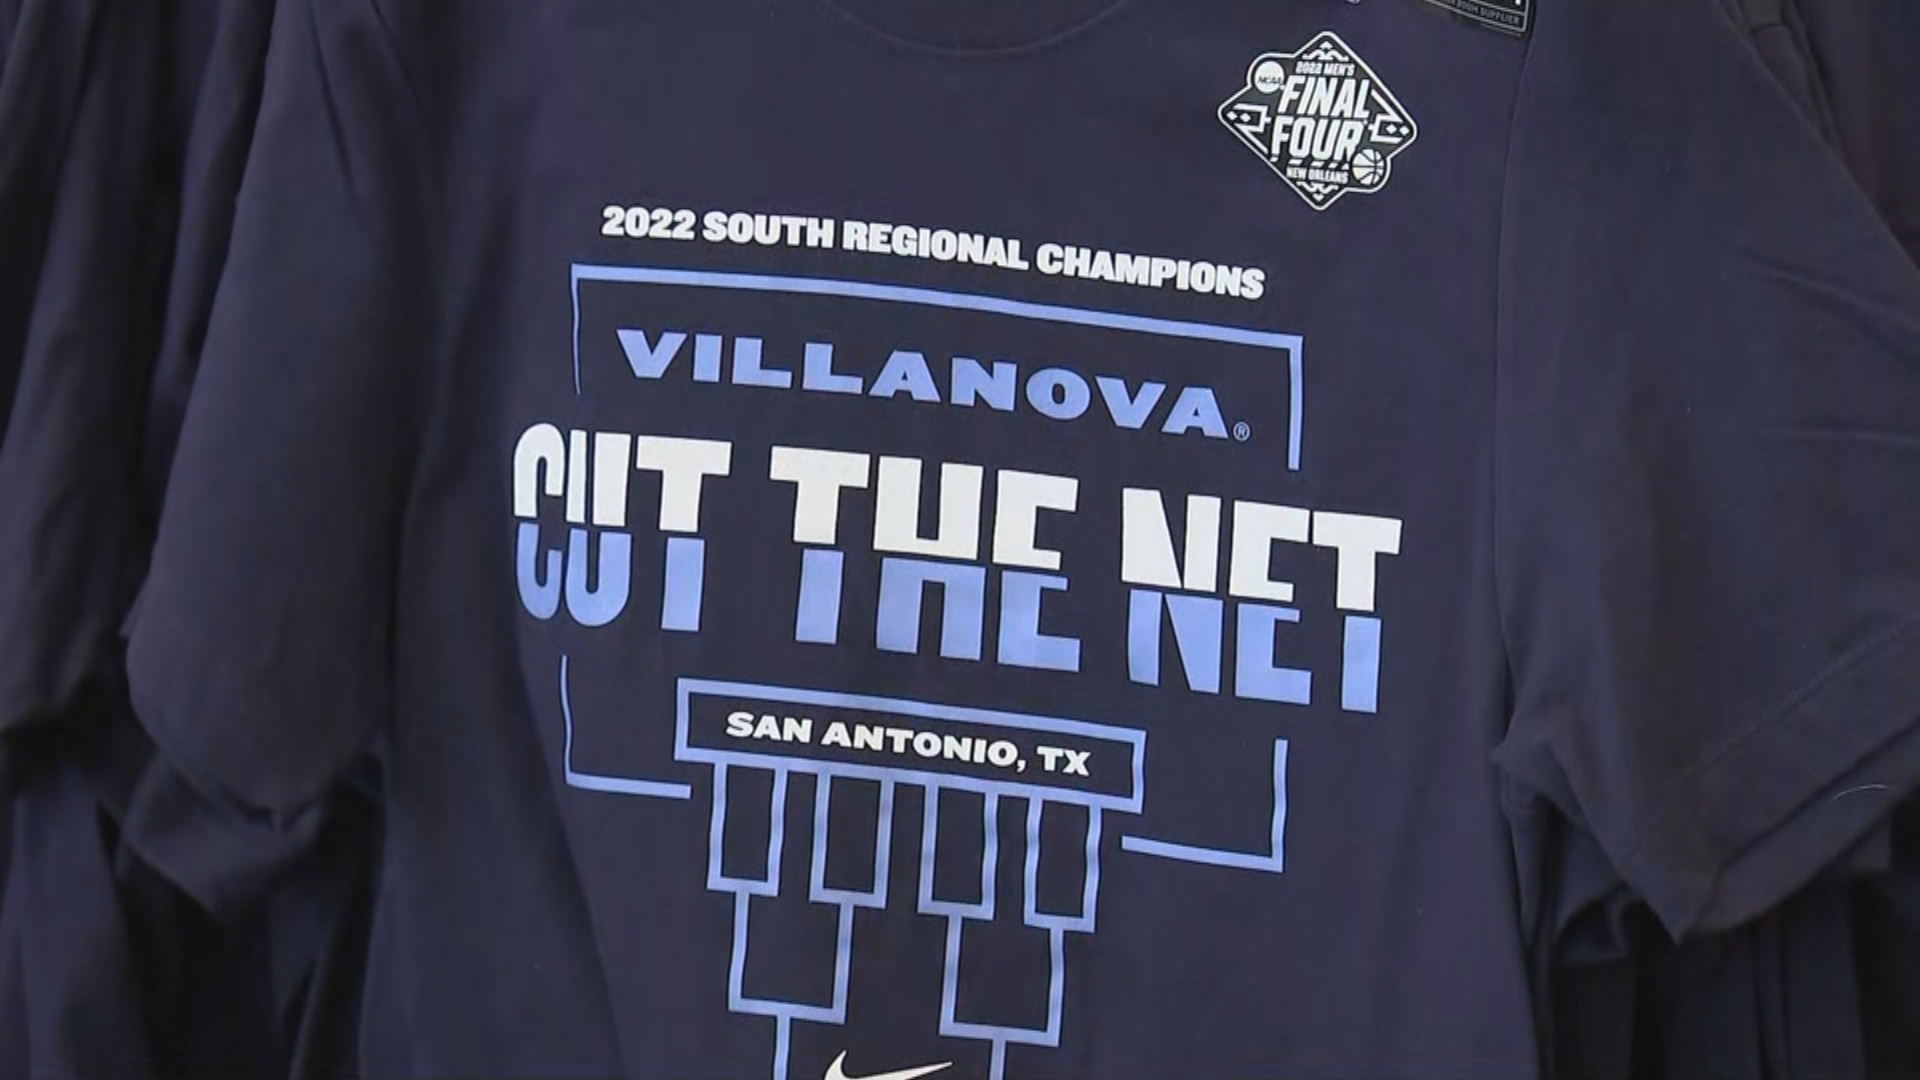 Villanova Fans Stock Up On Final Four Gear Ahead Of Game Against Kansas In New Orleans